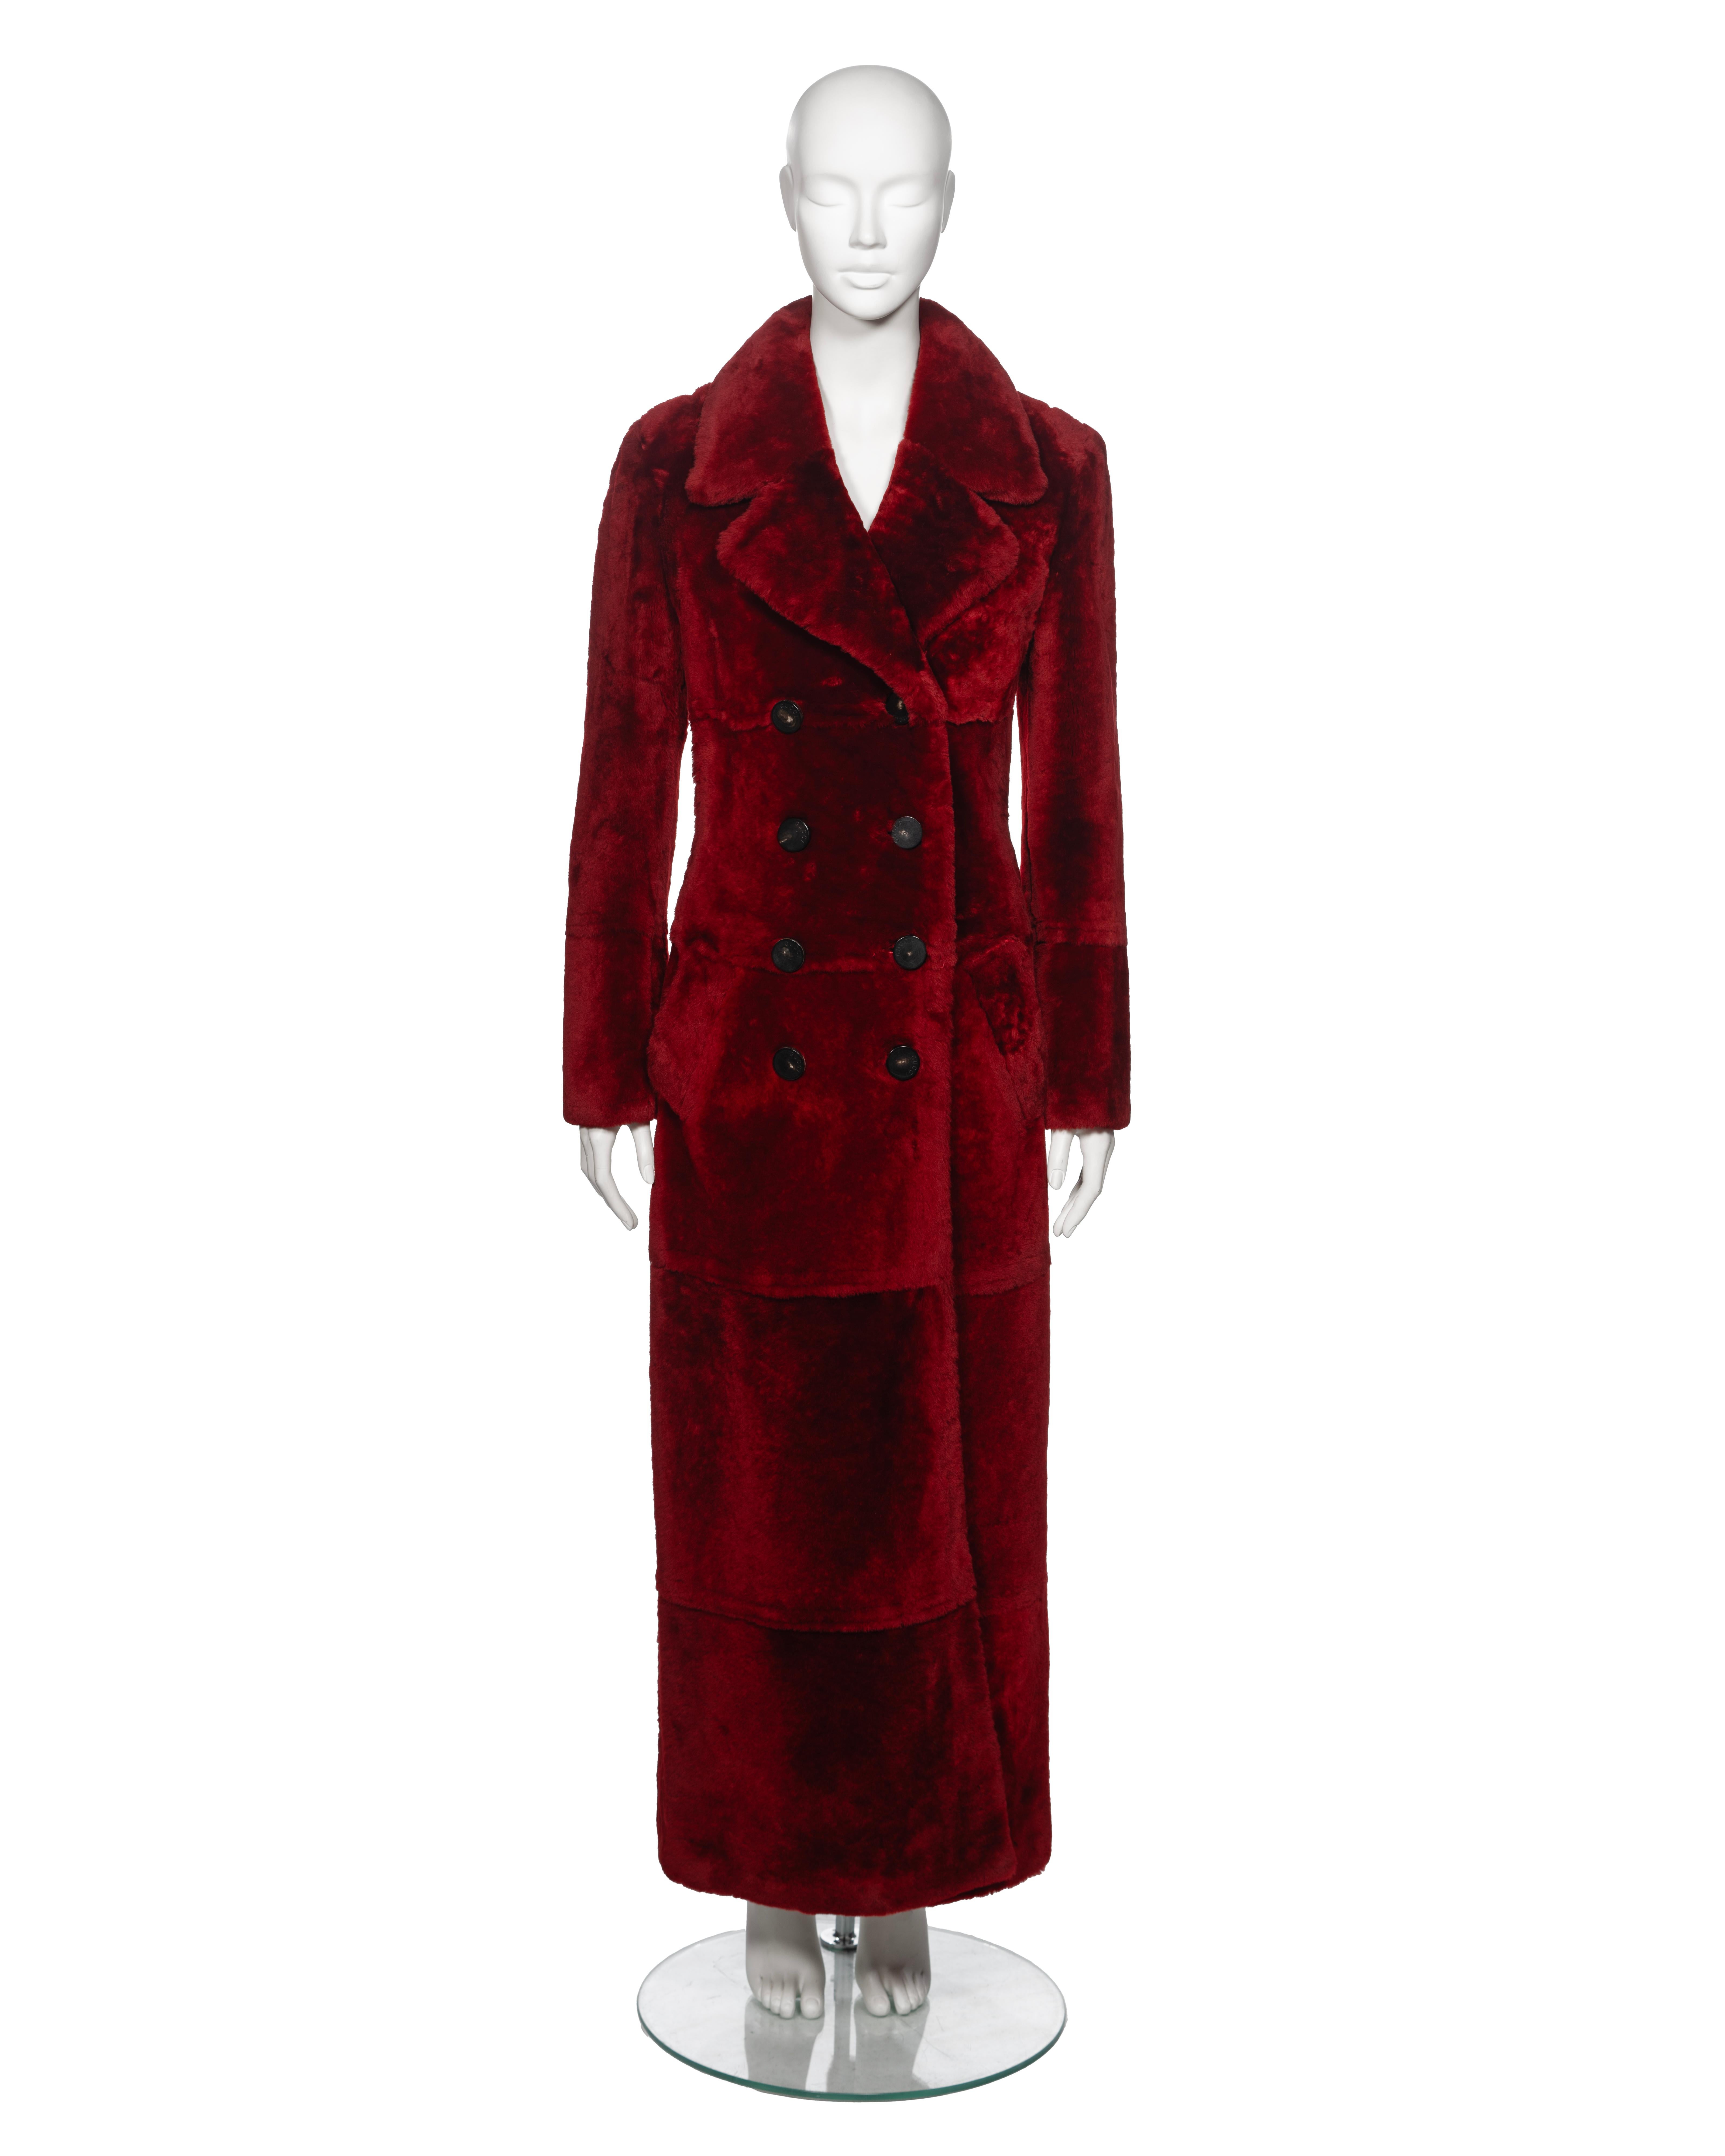 ▪ Archival Gucci Runway Coat
▪ Creative Director: Tom Ford
▪ Fall-Winter 1996
▪ Sold by One of a Kind Archive
▪ Crafted from multiple panels of red-dyed sheepskin with a leather backing, this coat exudes luxurious quality
▪ Featuring a